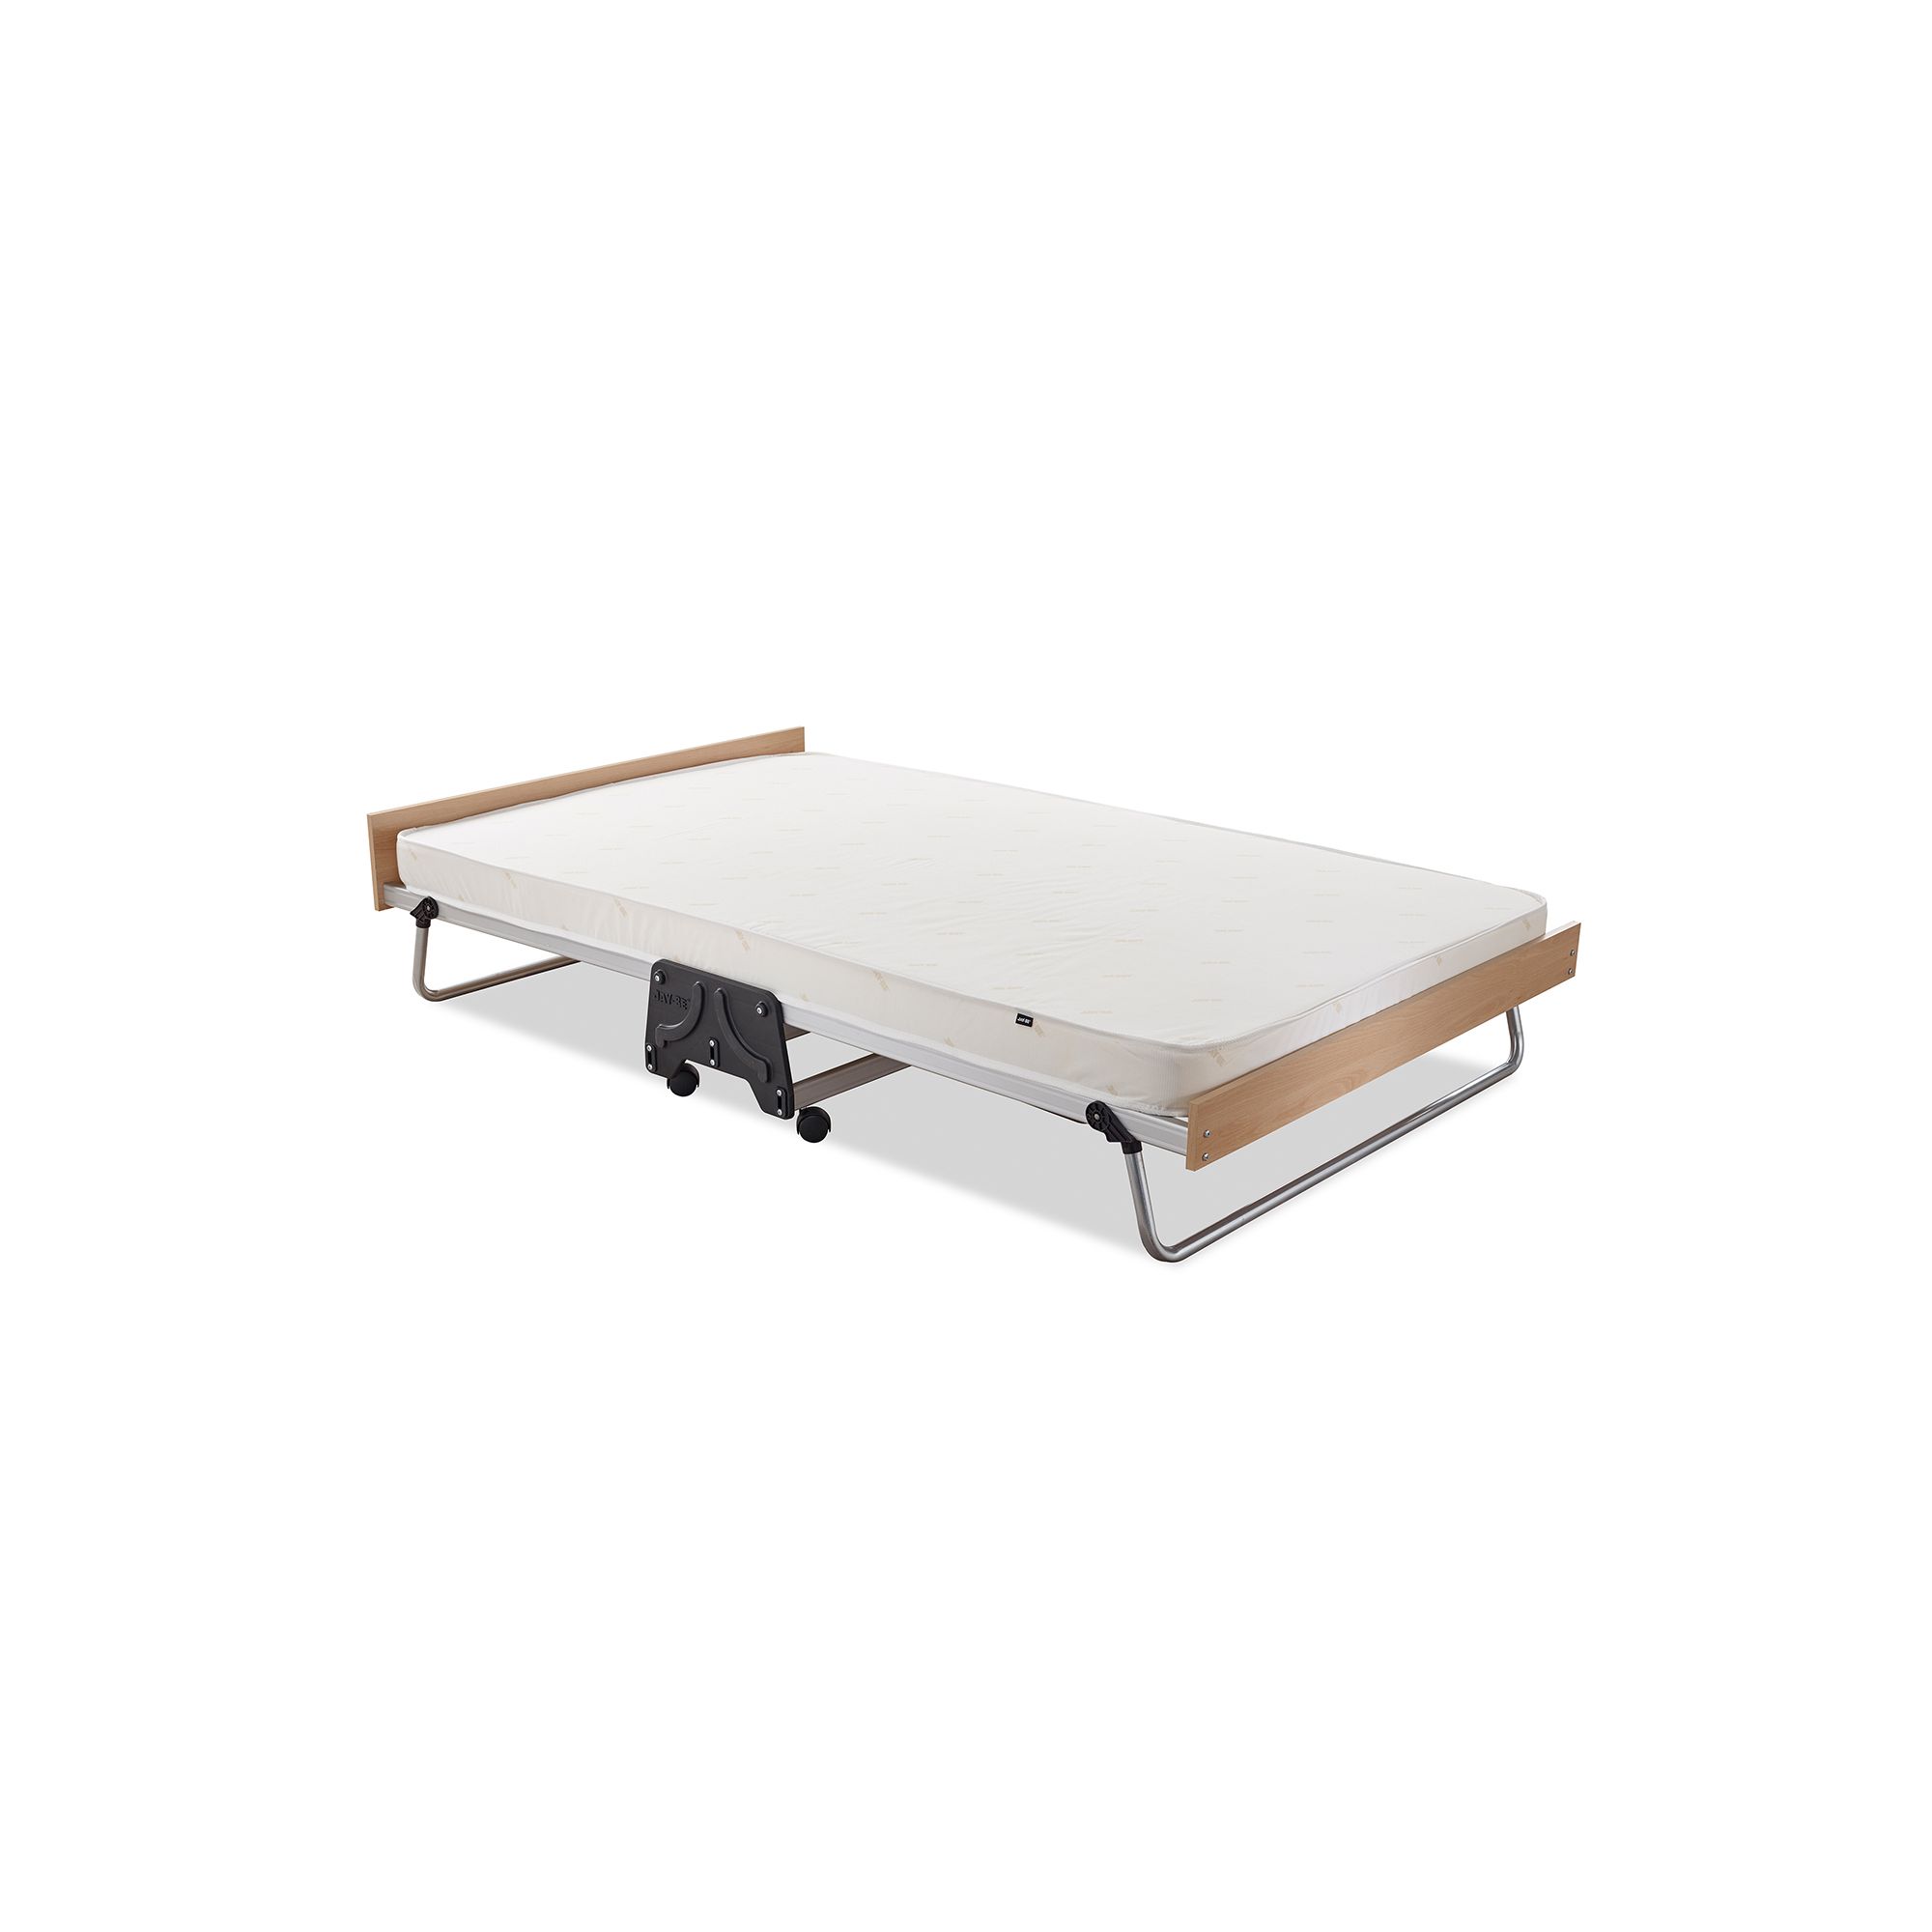 Jay-Be Ultimate Double High Performance Folding Bed for Permanent Sleeper at Tesco Direct